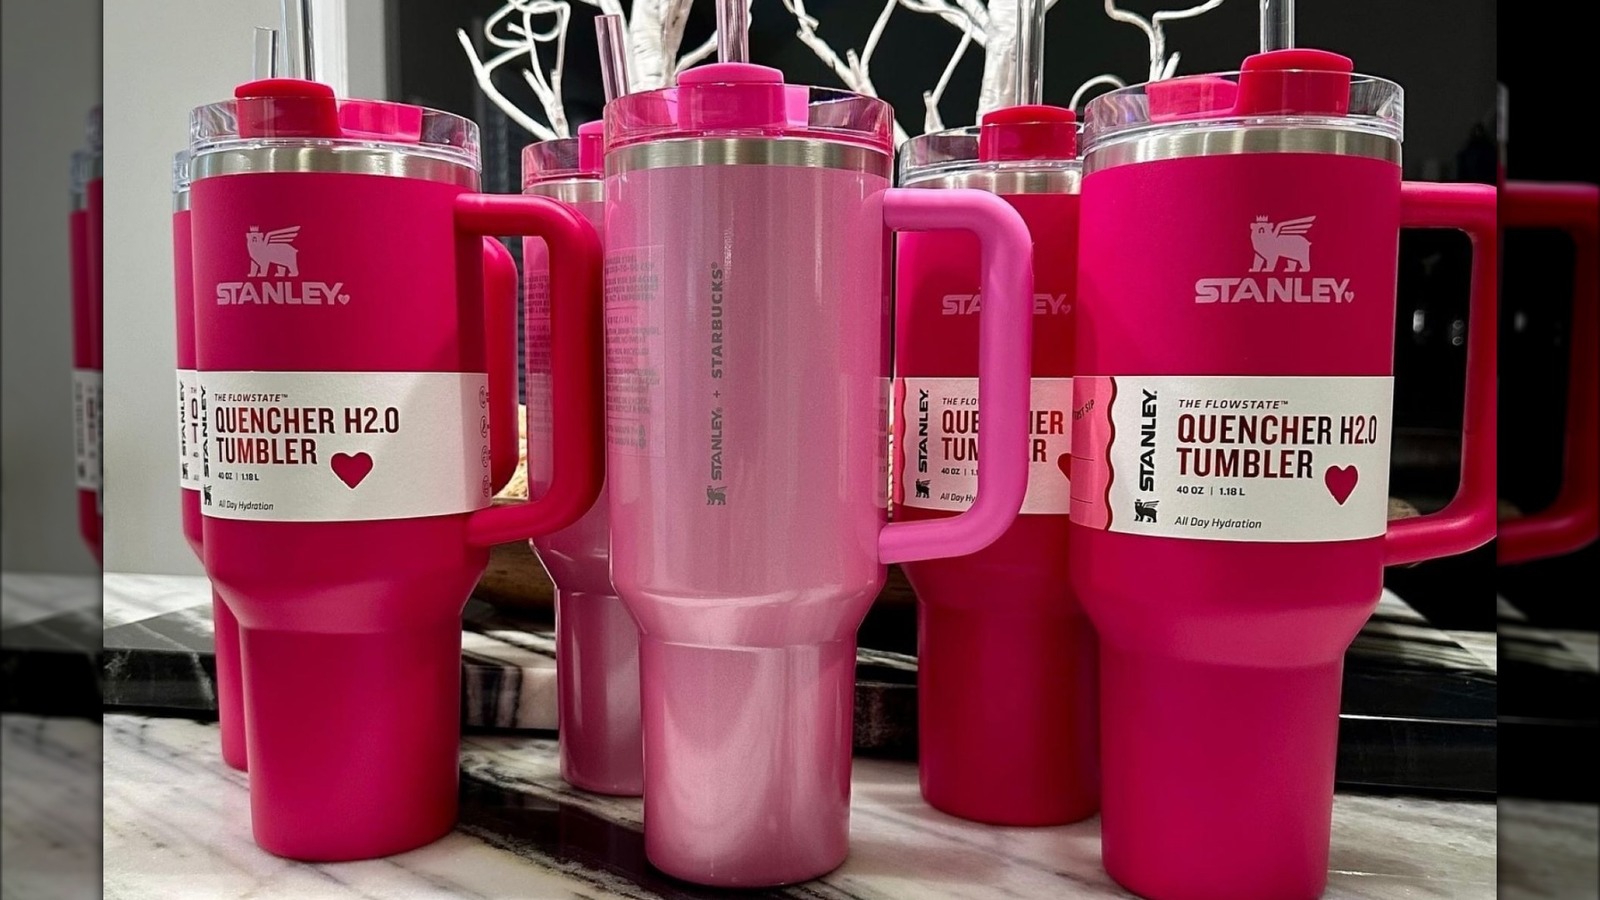 Camped out at Target for the new viral pink Starbucks Stanley cup